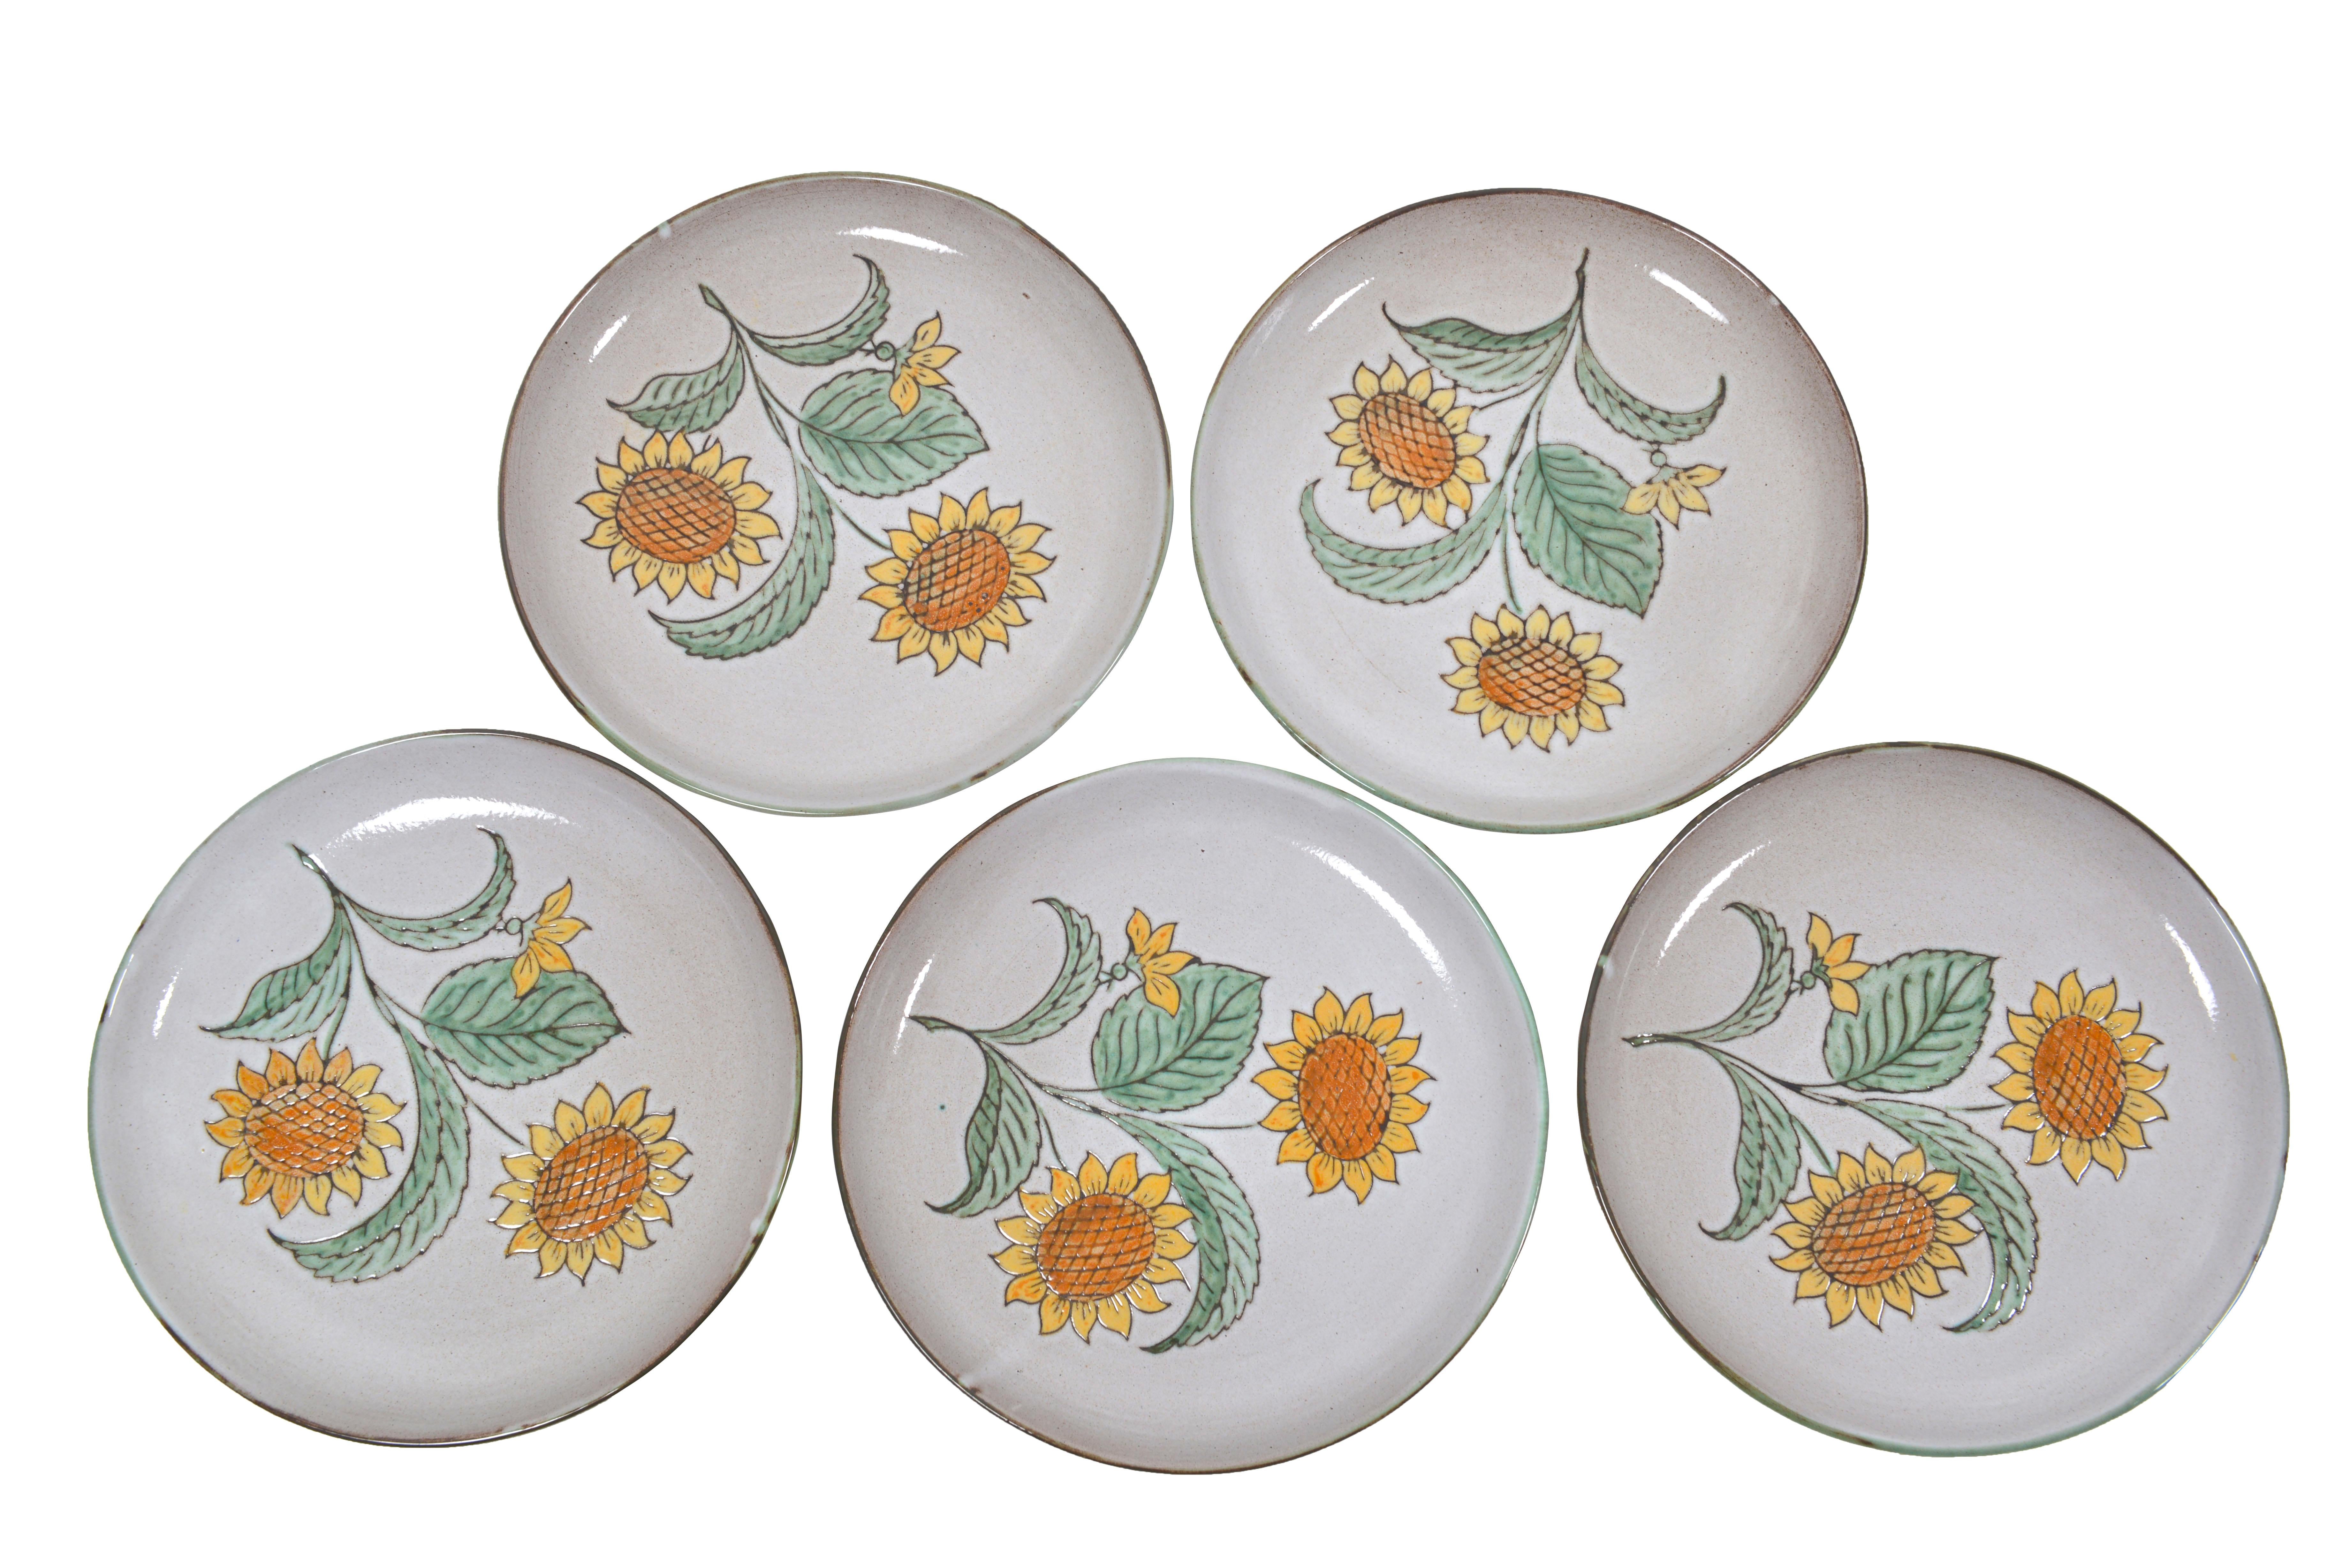 Charming set of five big plates or serving platters in ceramic, made in Vallauris, France, circa 1950. Beautifully delicately painted sunflowers. Excellent condition!